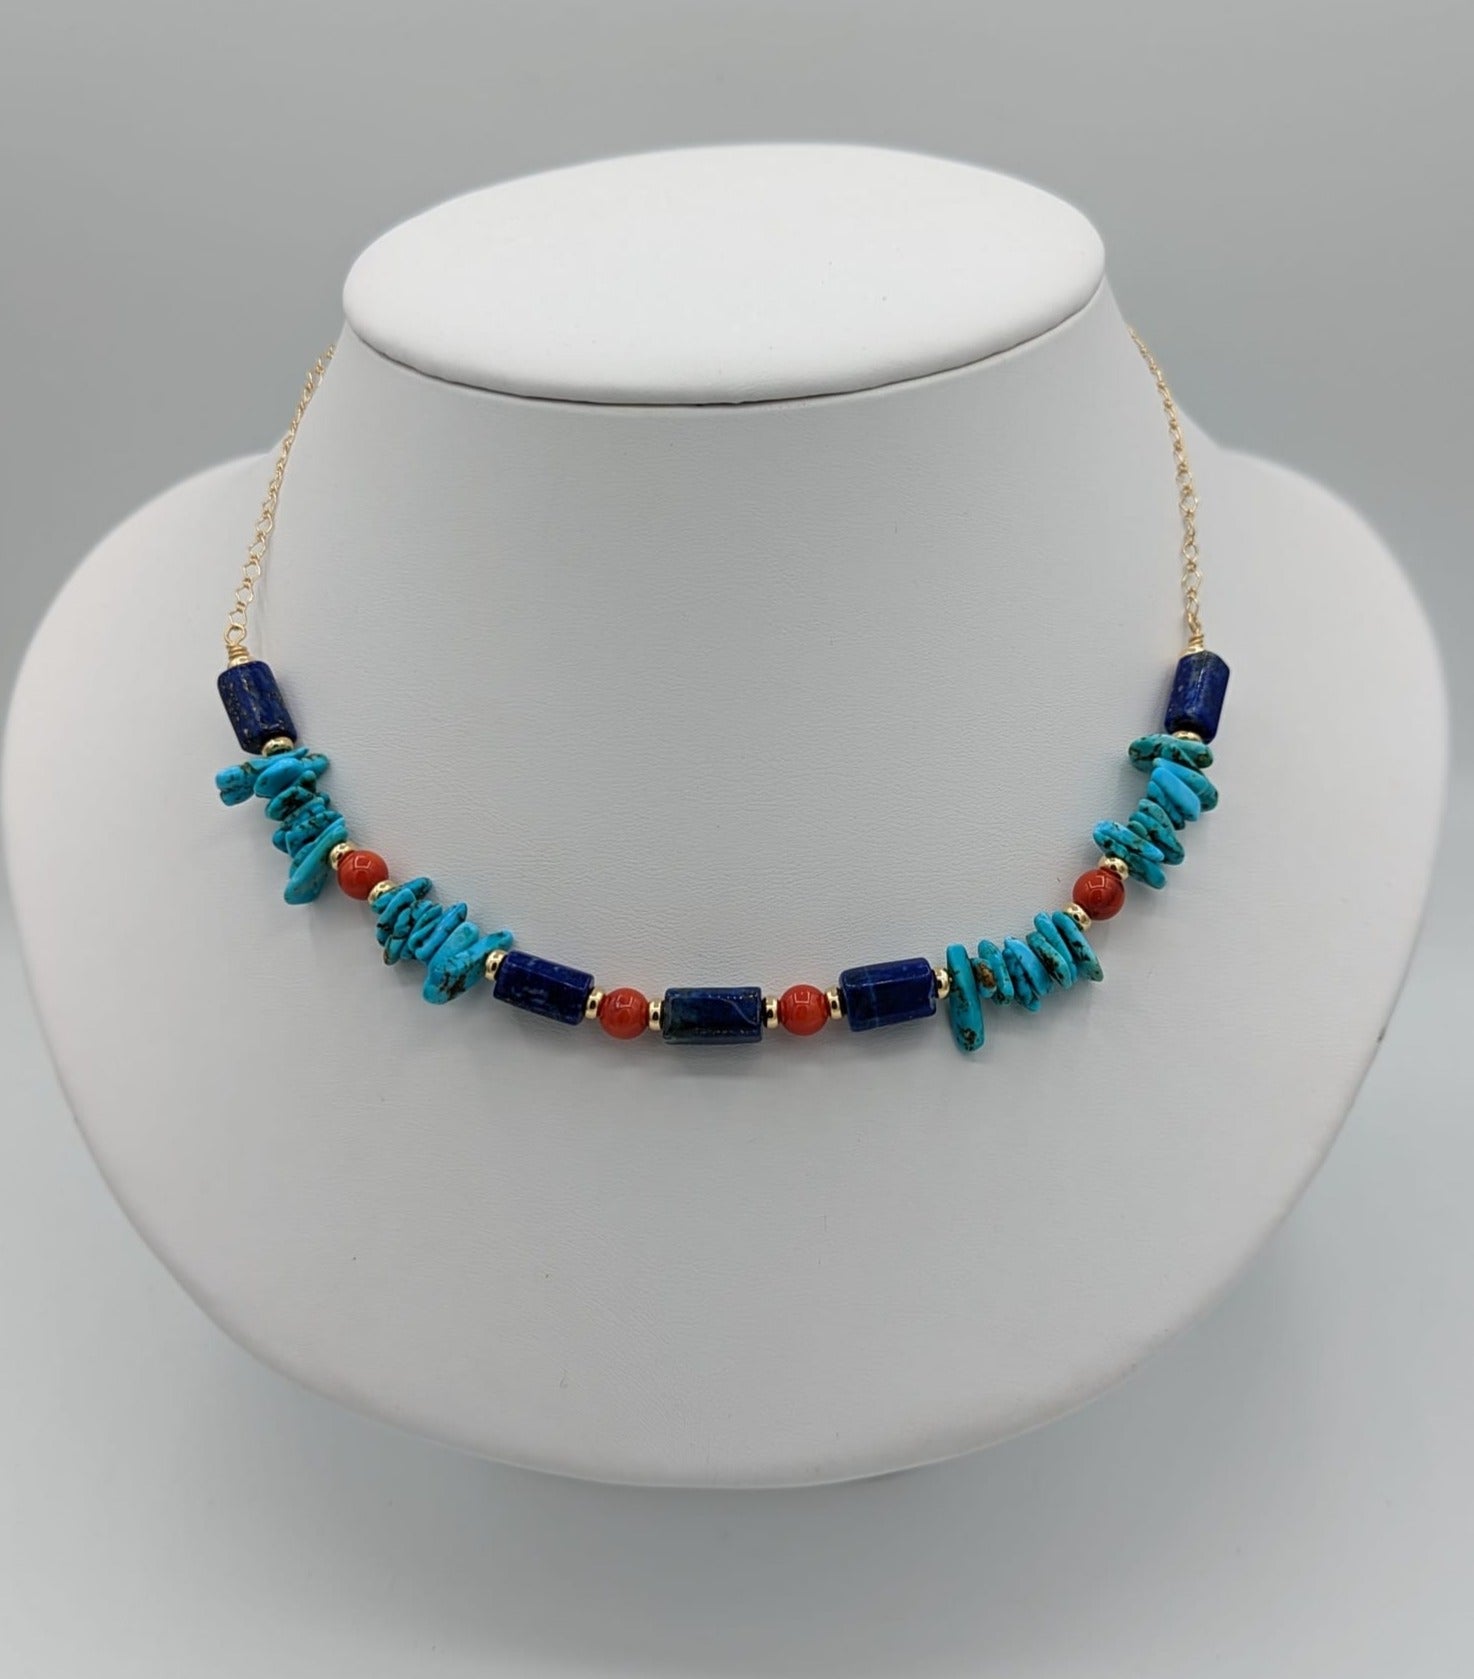 14K Solid Gold Handcrafted Turquoise, Lapis Lazuli, and Red Coral Necklace